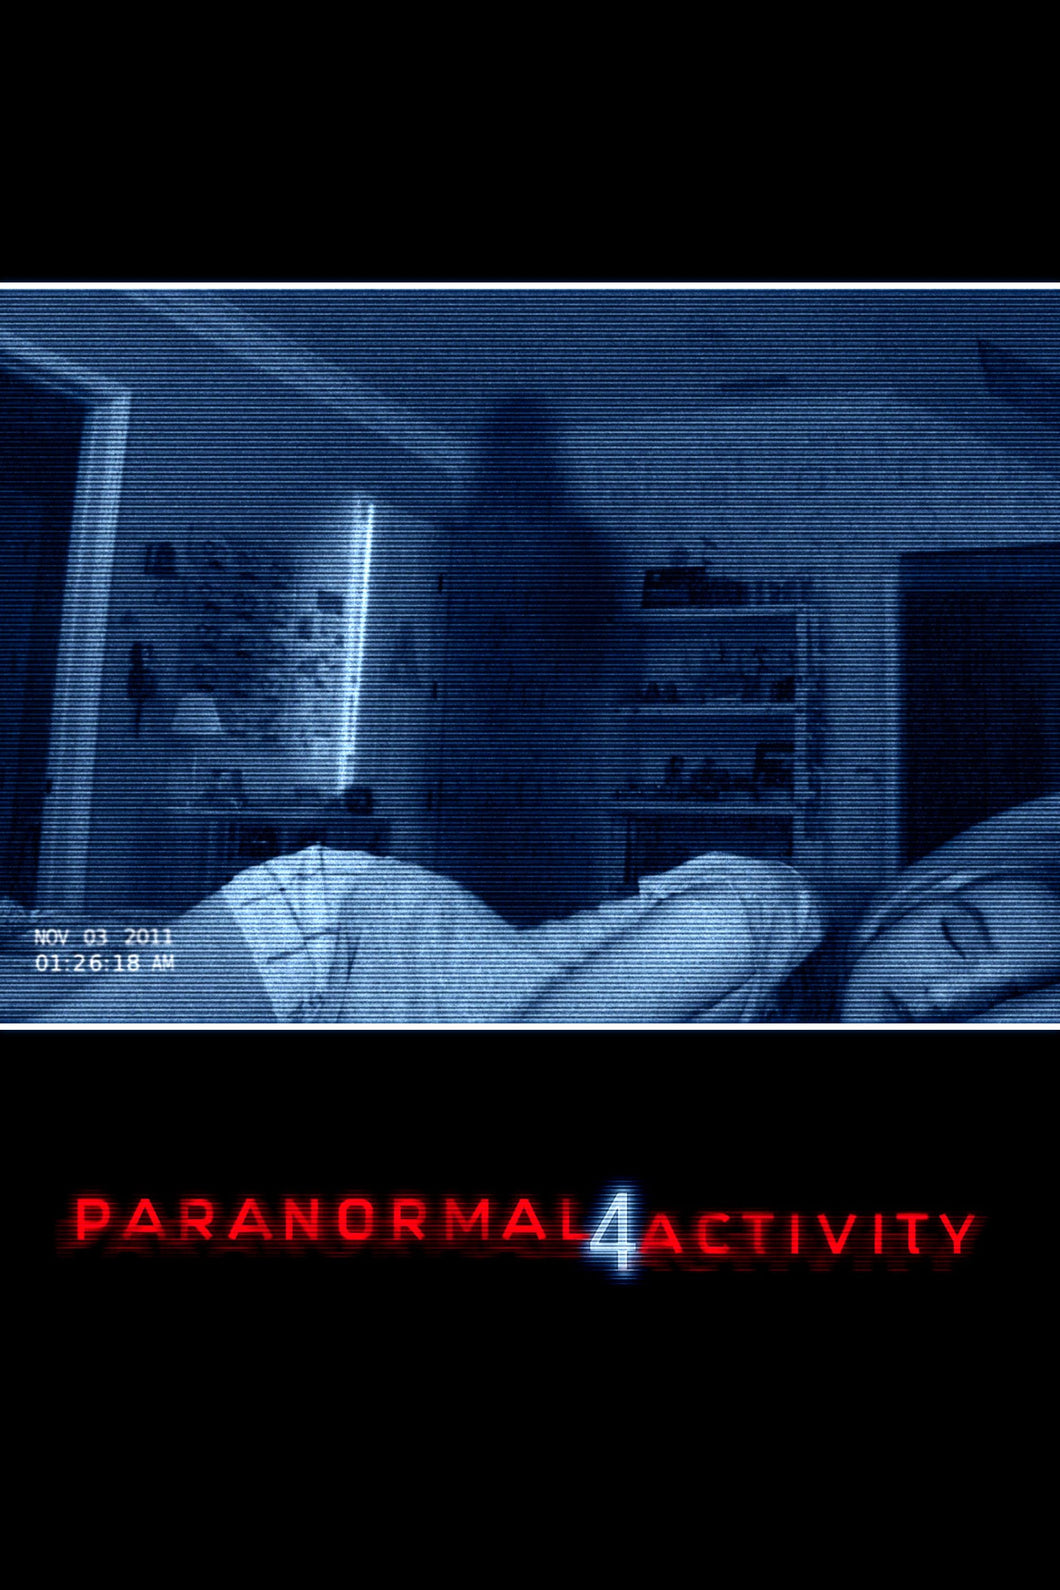 Paranormal Activity 4 Movie Poster Framed or Unframed Glossy Poster Free UK Shipping!!!